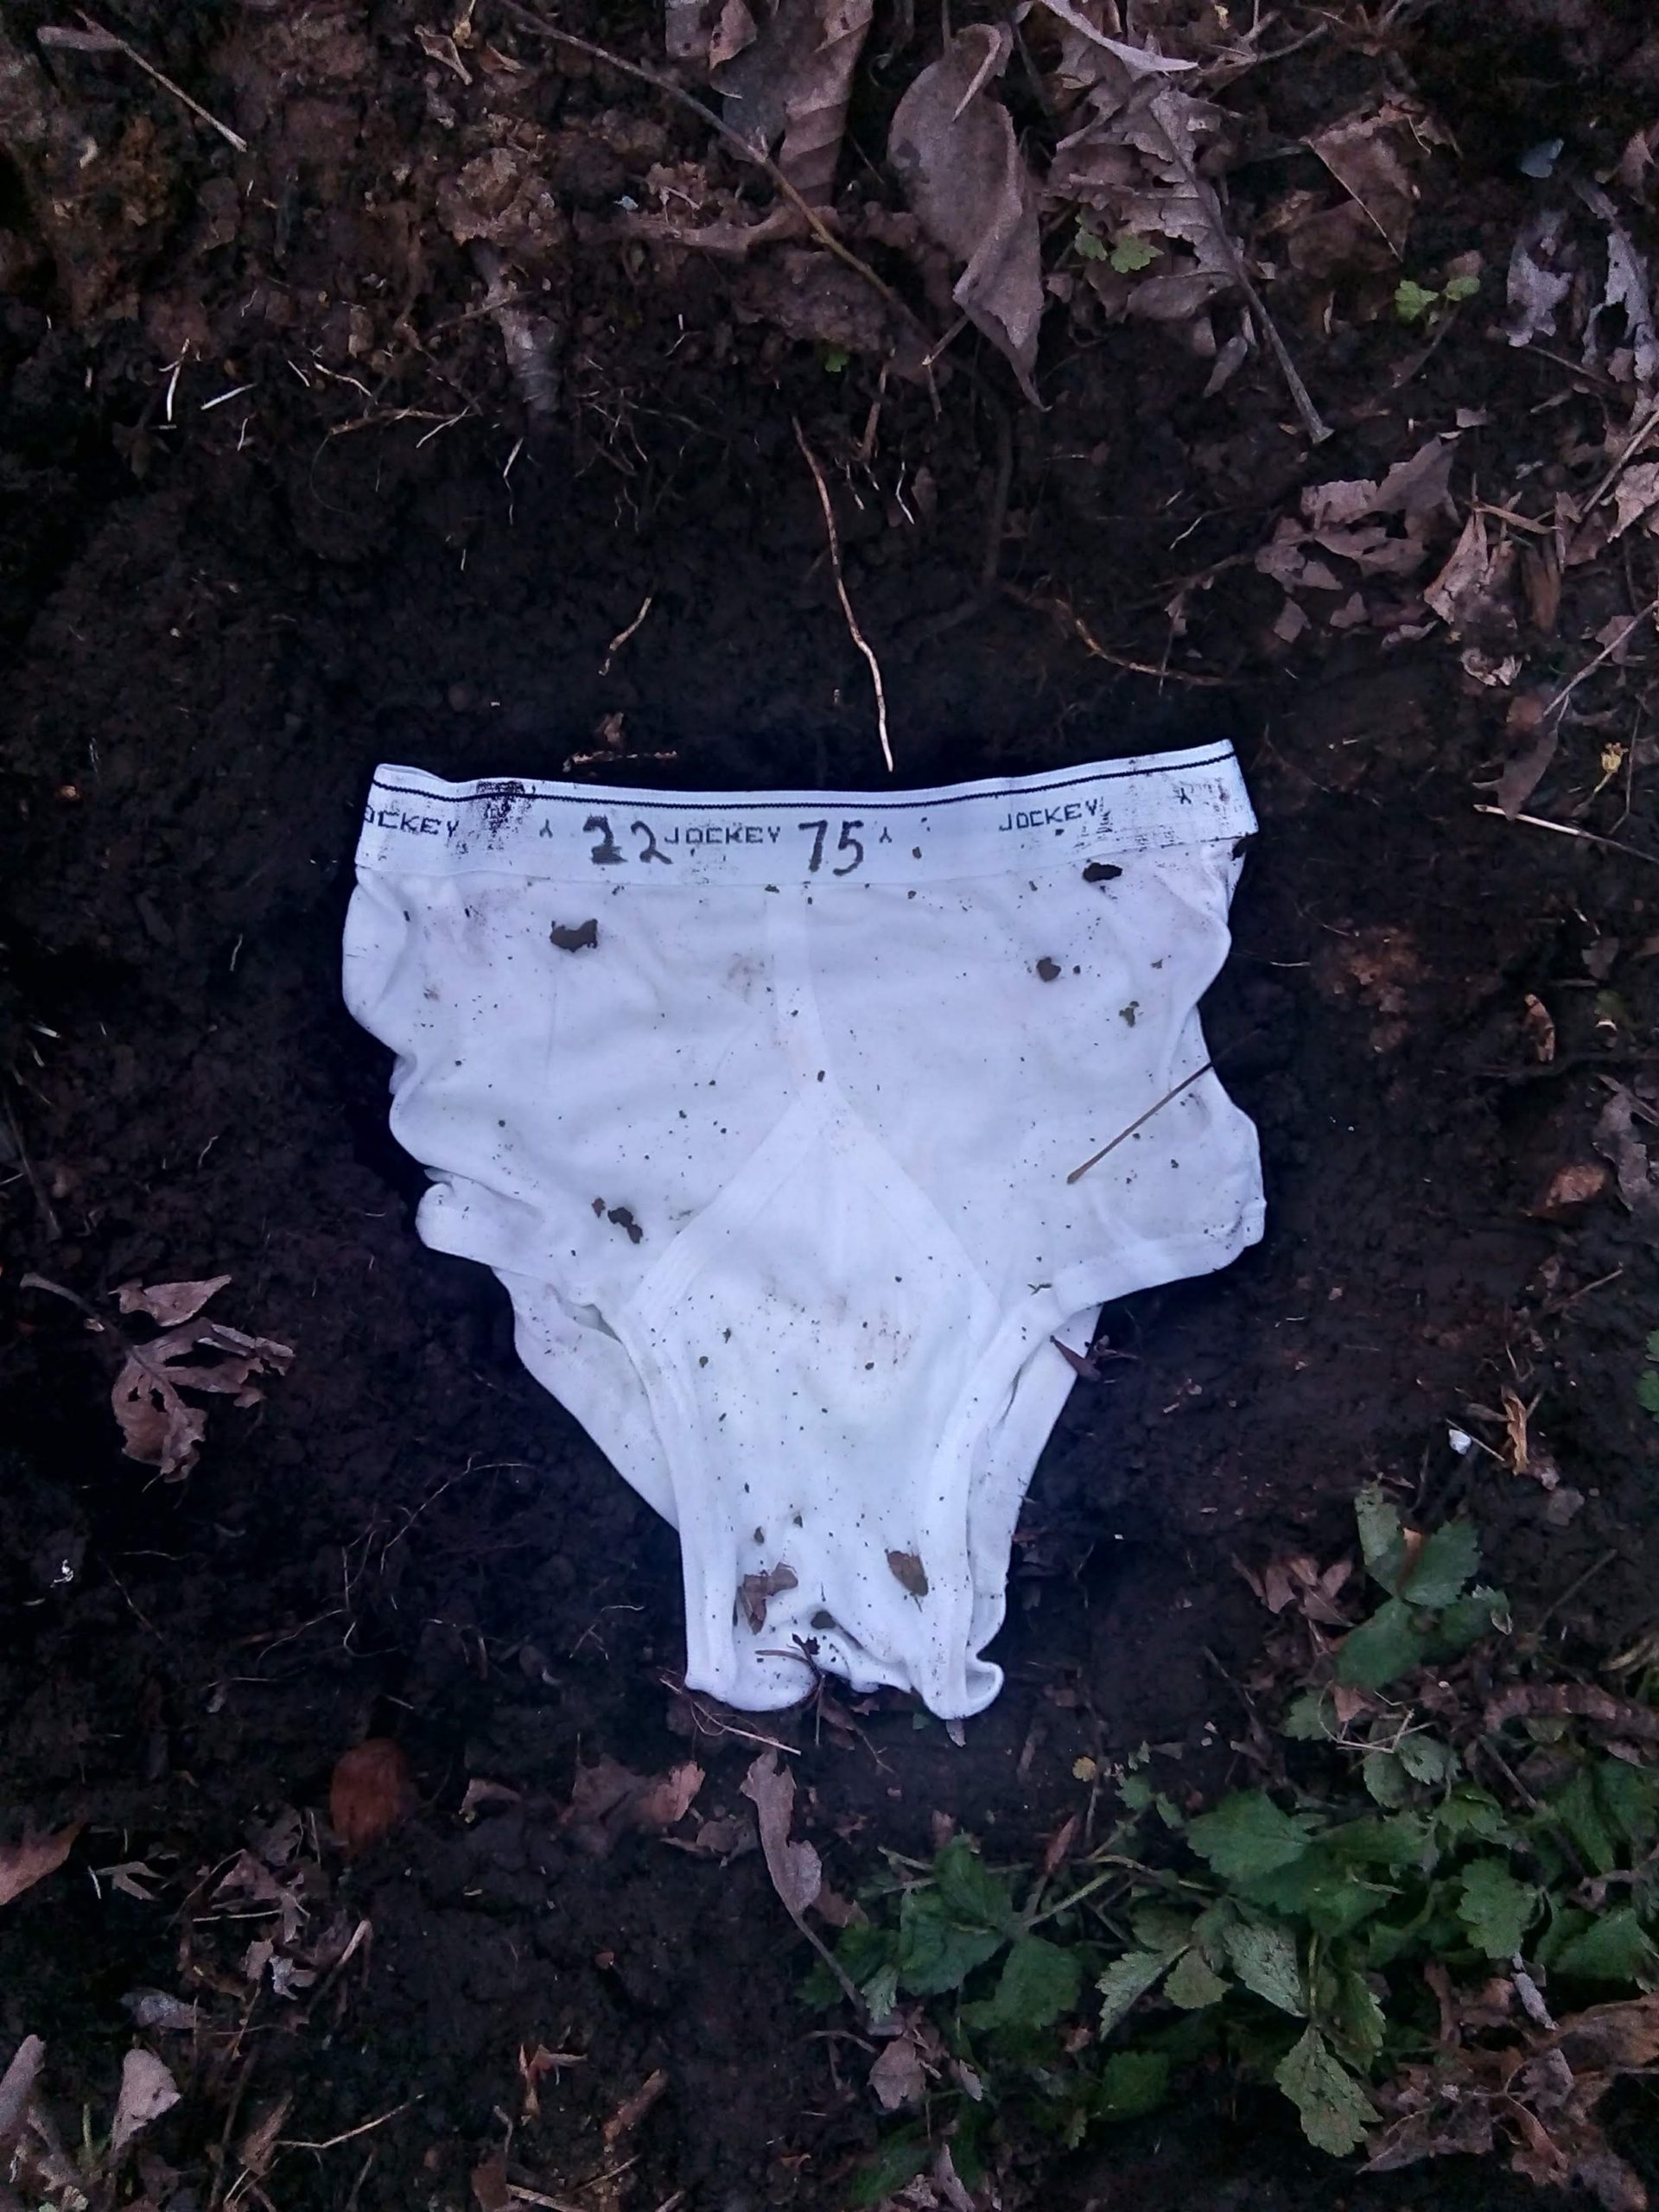 soil-your-undies - Oswego Lake Watershed Council